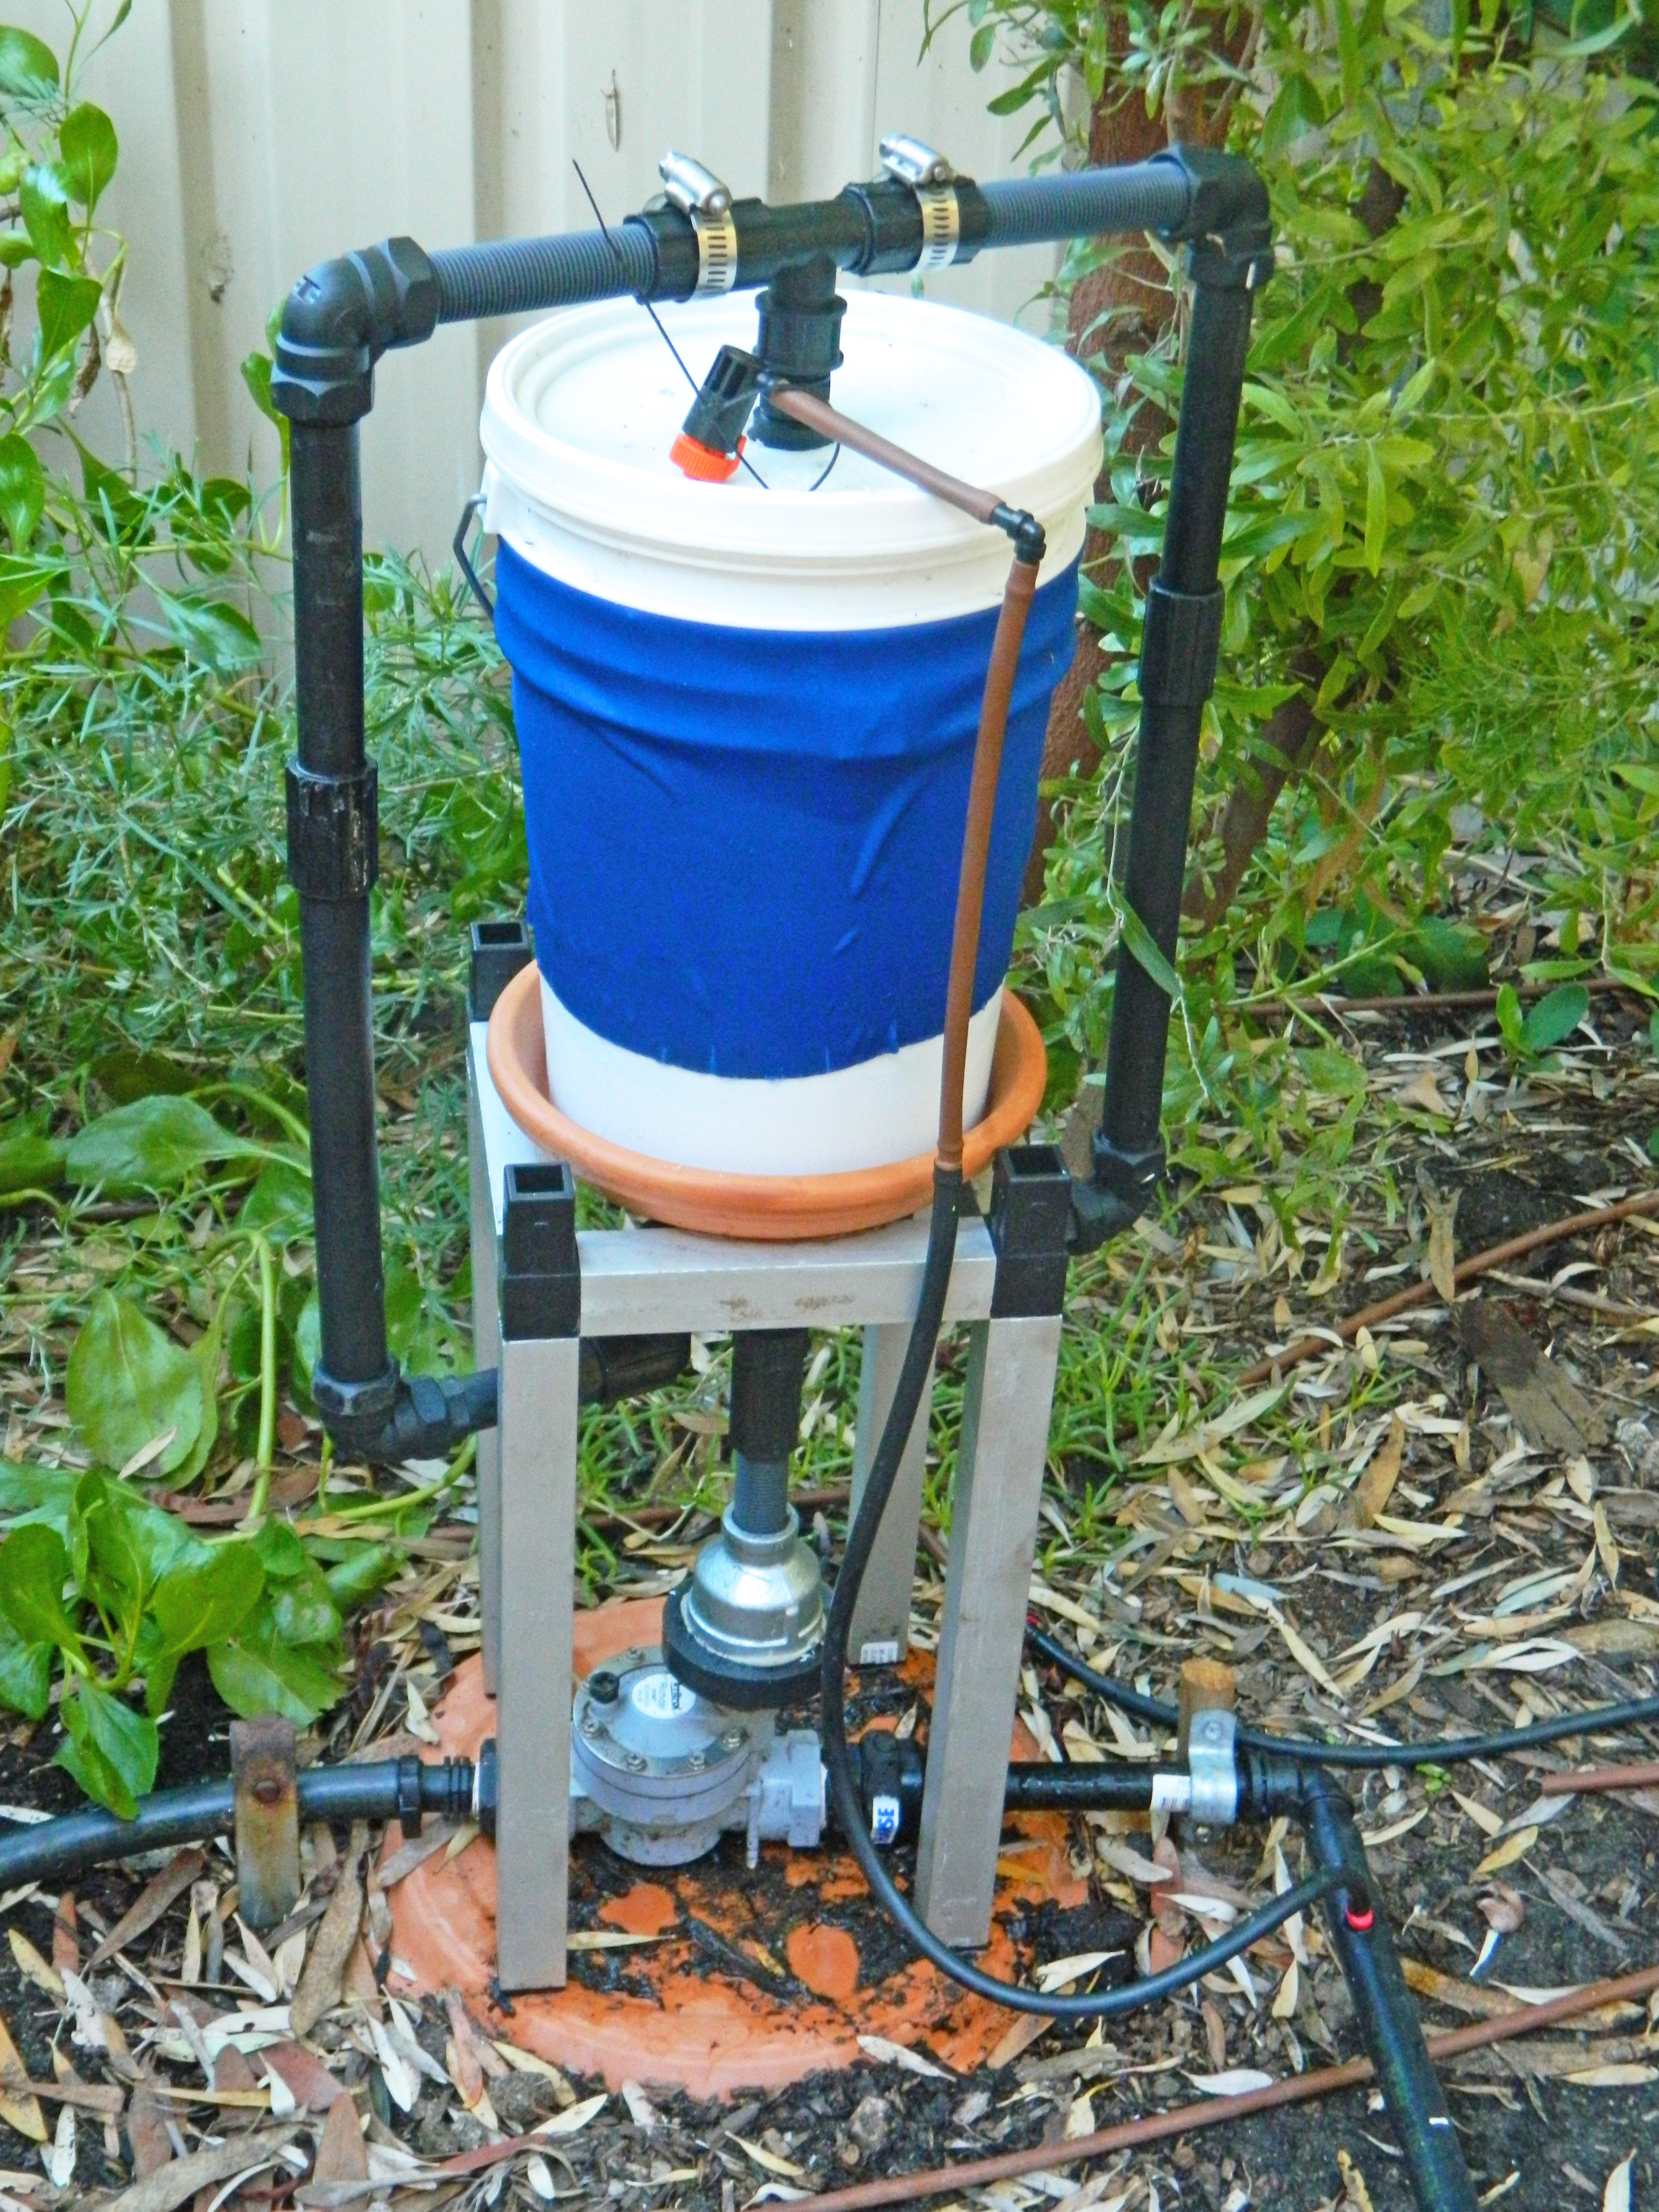 This invention is an unpowered irrigation controller that can be used for any irrigation application that uses a solenoid valve. I have just pub...